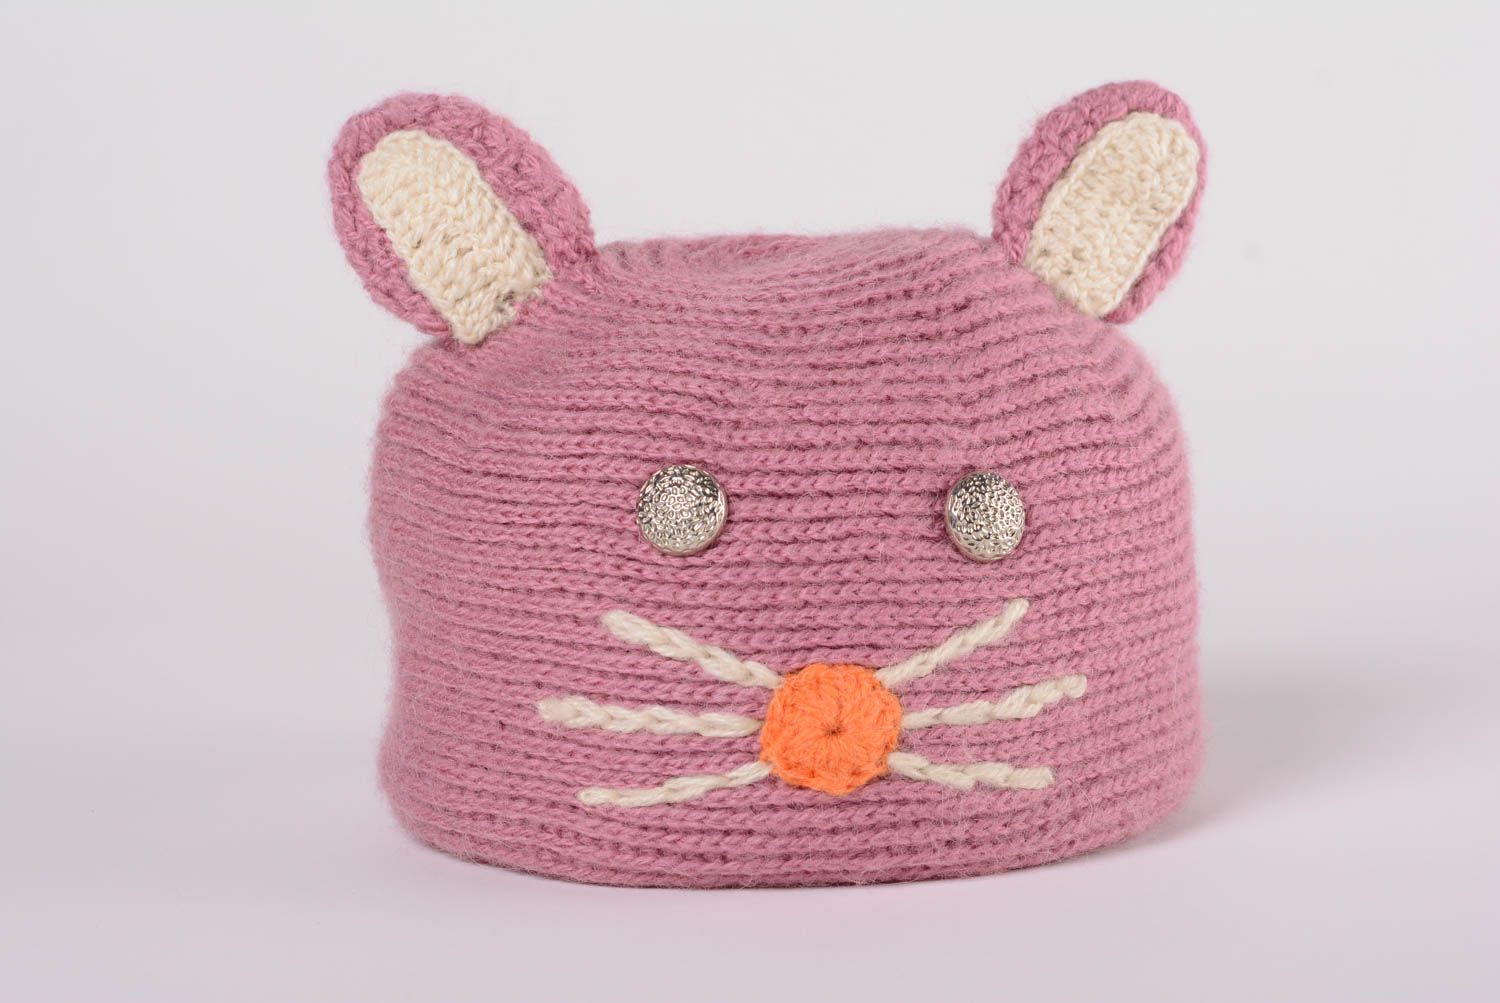 Handmade funny animal hat knitted of pink woolen threads with ears for baby Cat photo 1